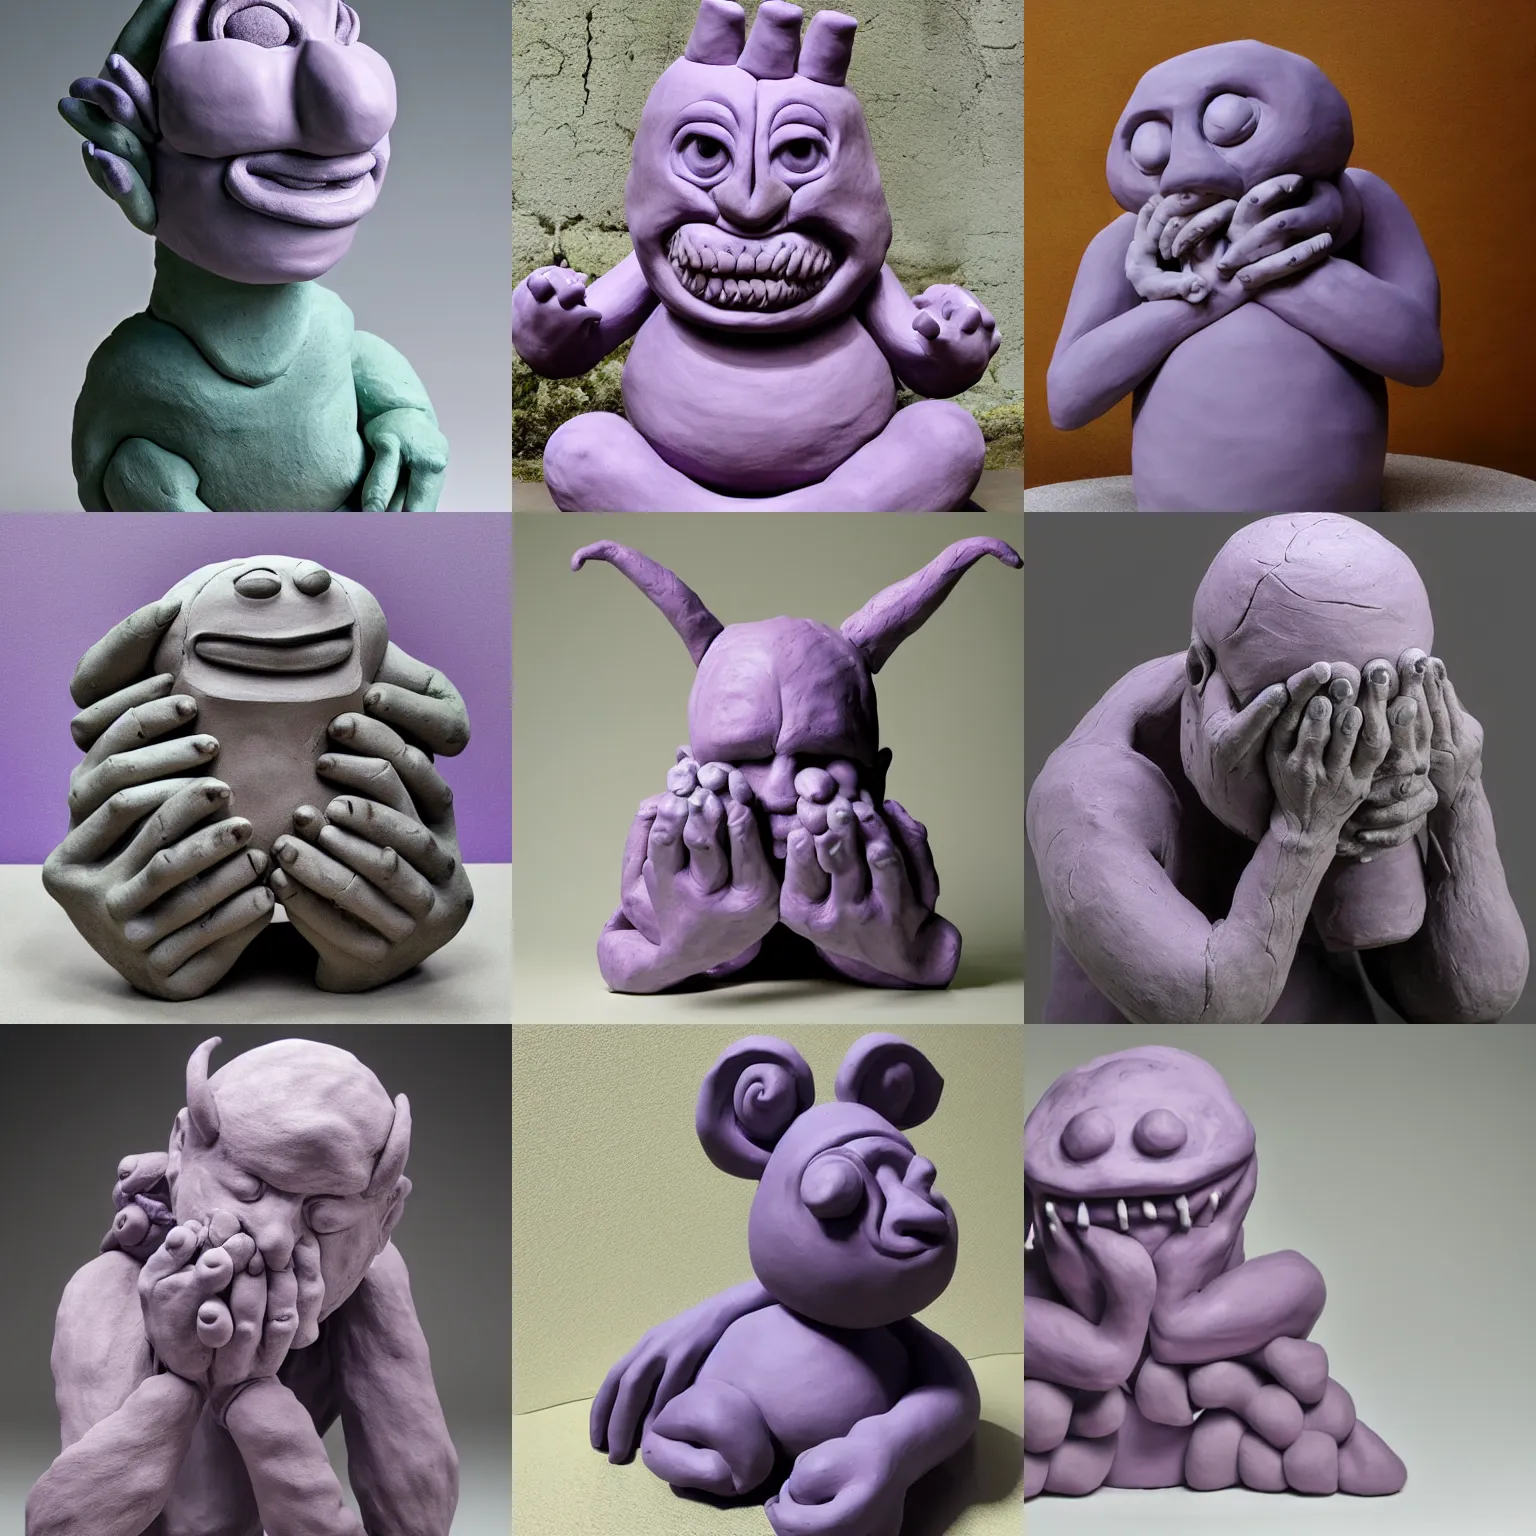 Prompt: A clay sculpture of a monster holding its own head in its hands, purple and grey colour scheme